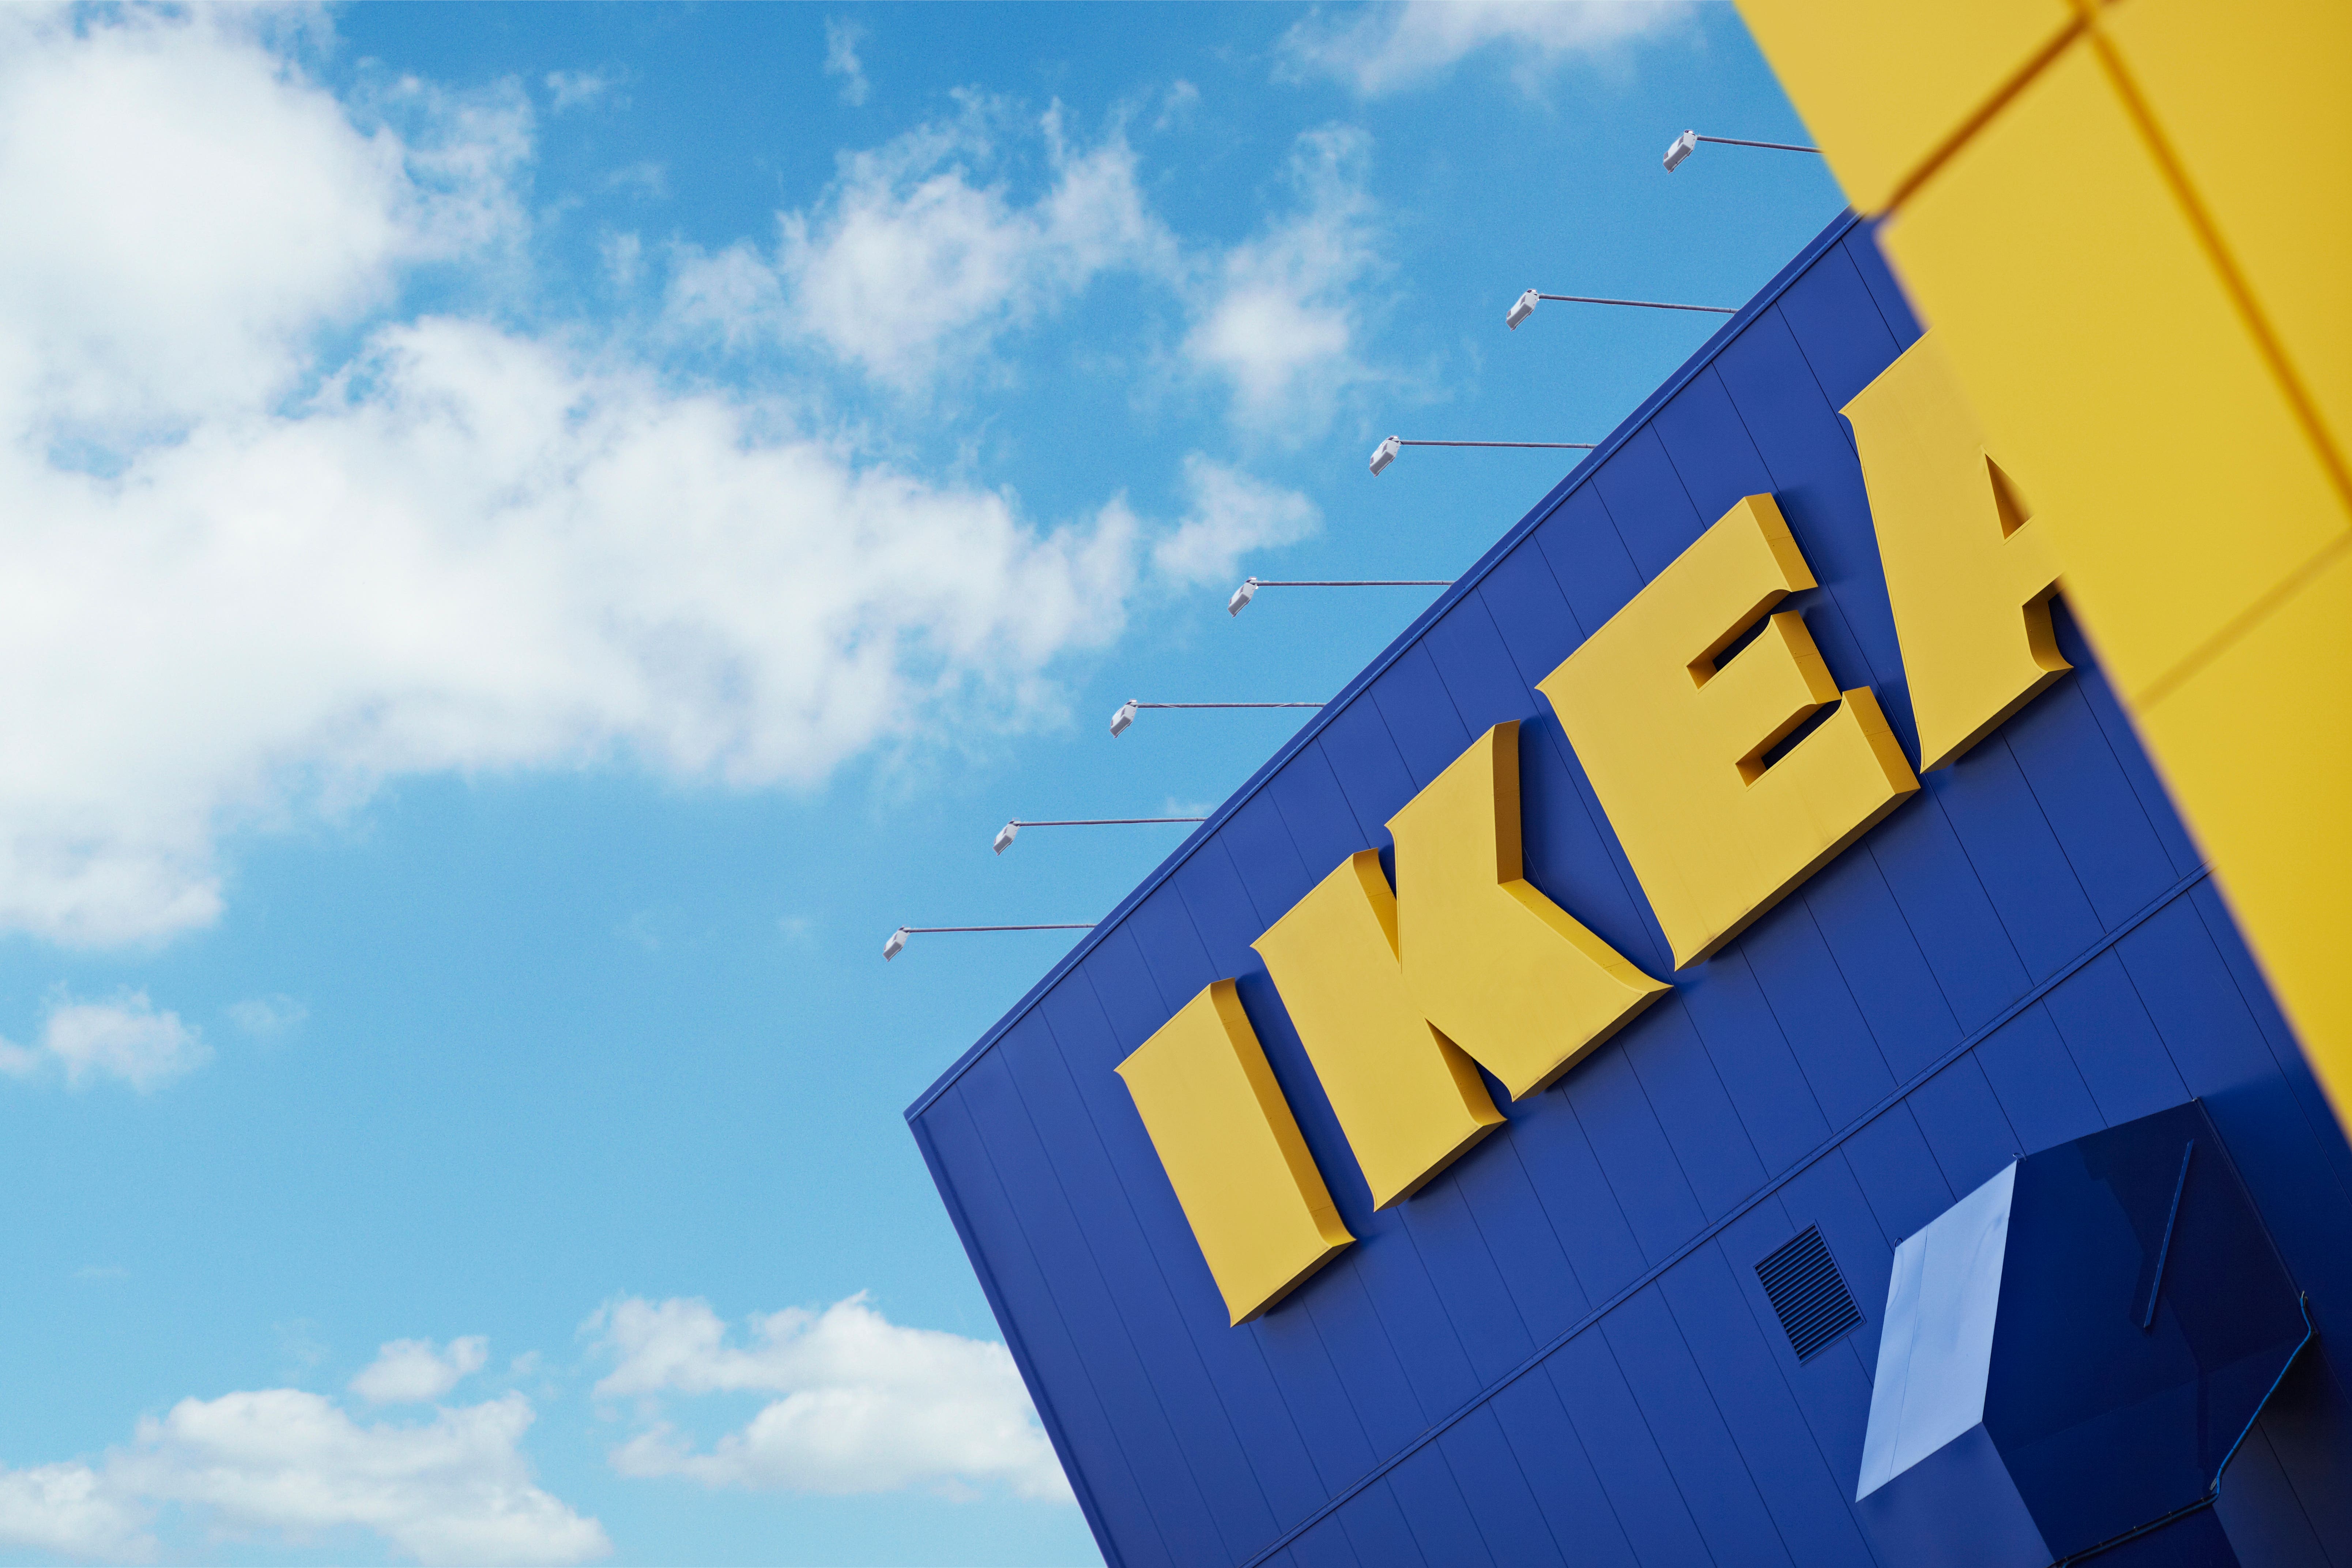 Ikea has revealed plans to hike pay for UK staff as part of more than ?35 million of investment in higher wages and bonuses (Ikea/PA)